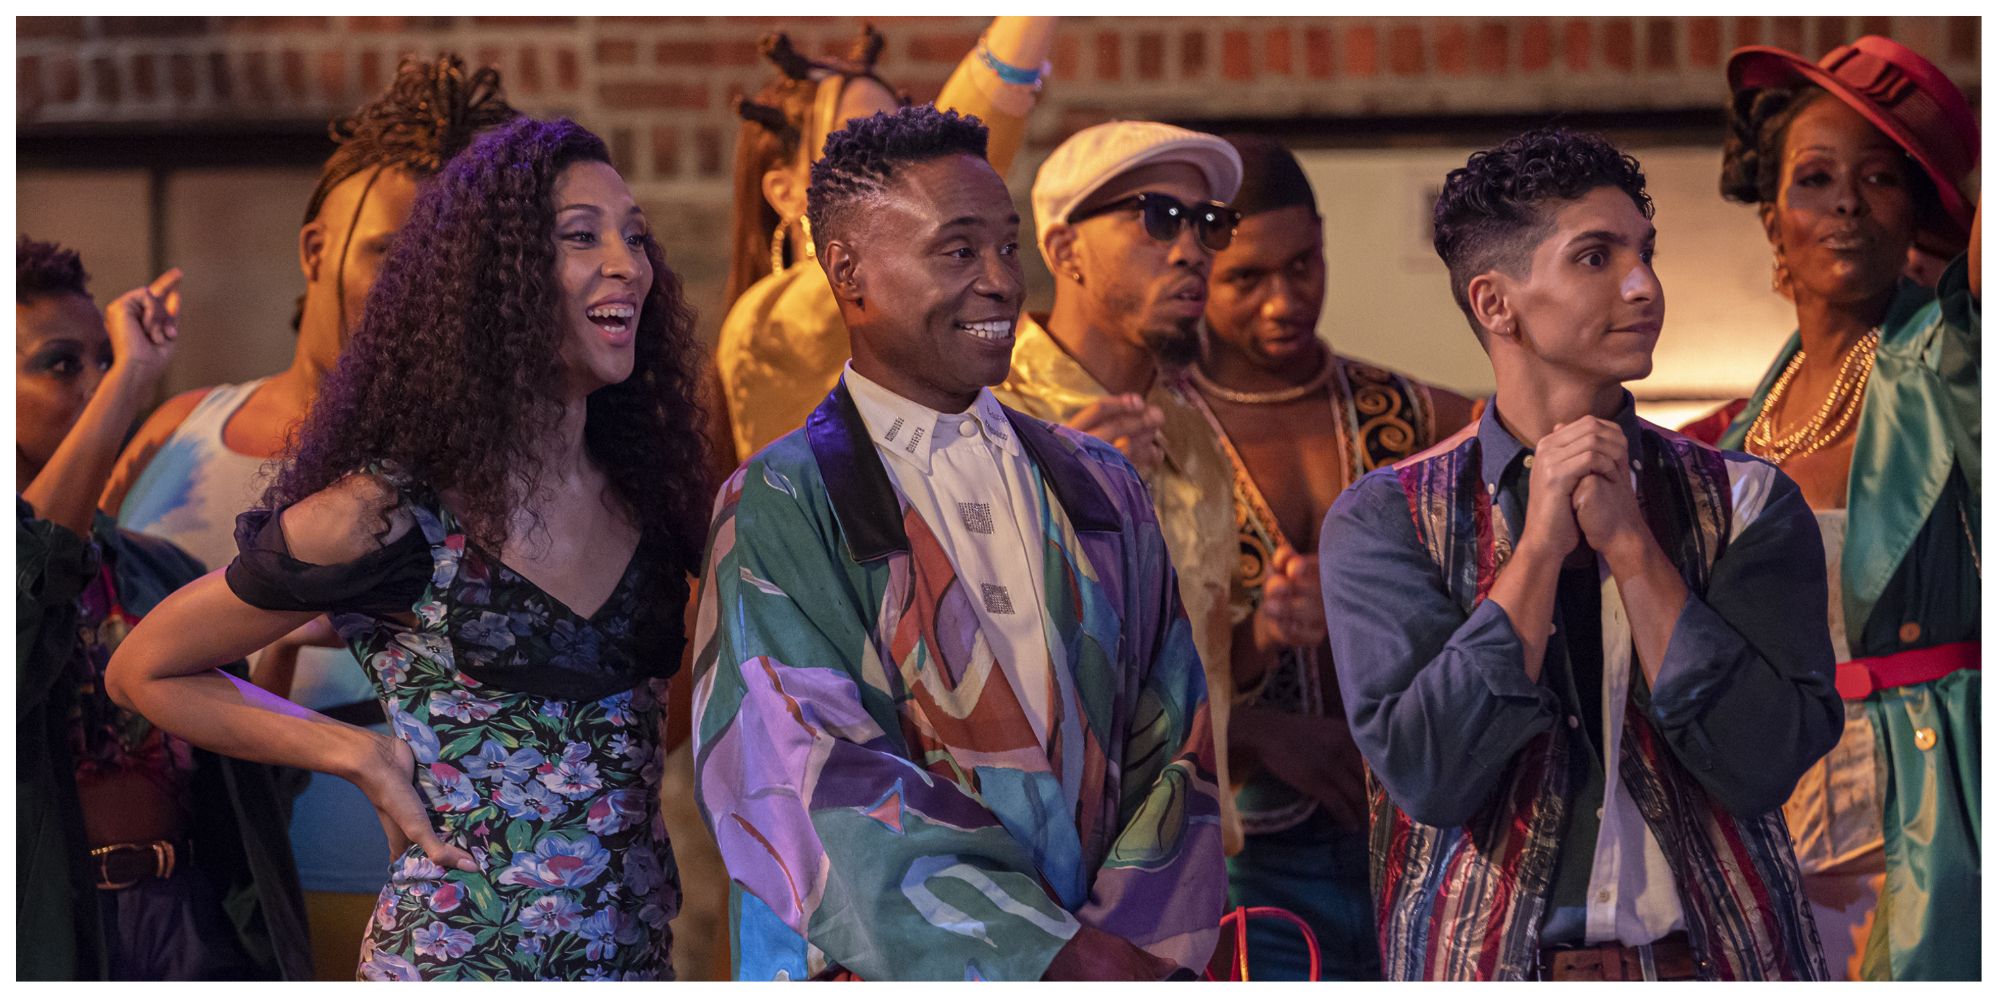 Main characters from Pose laughing and celebrating together